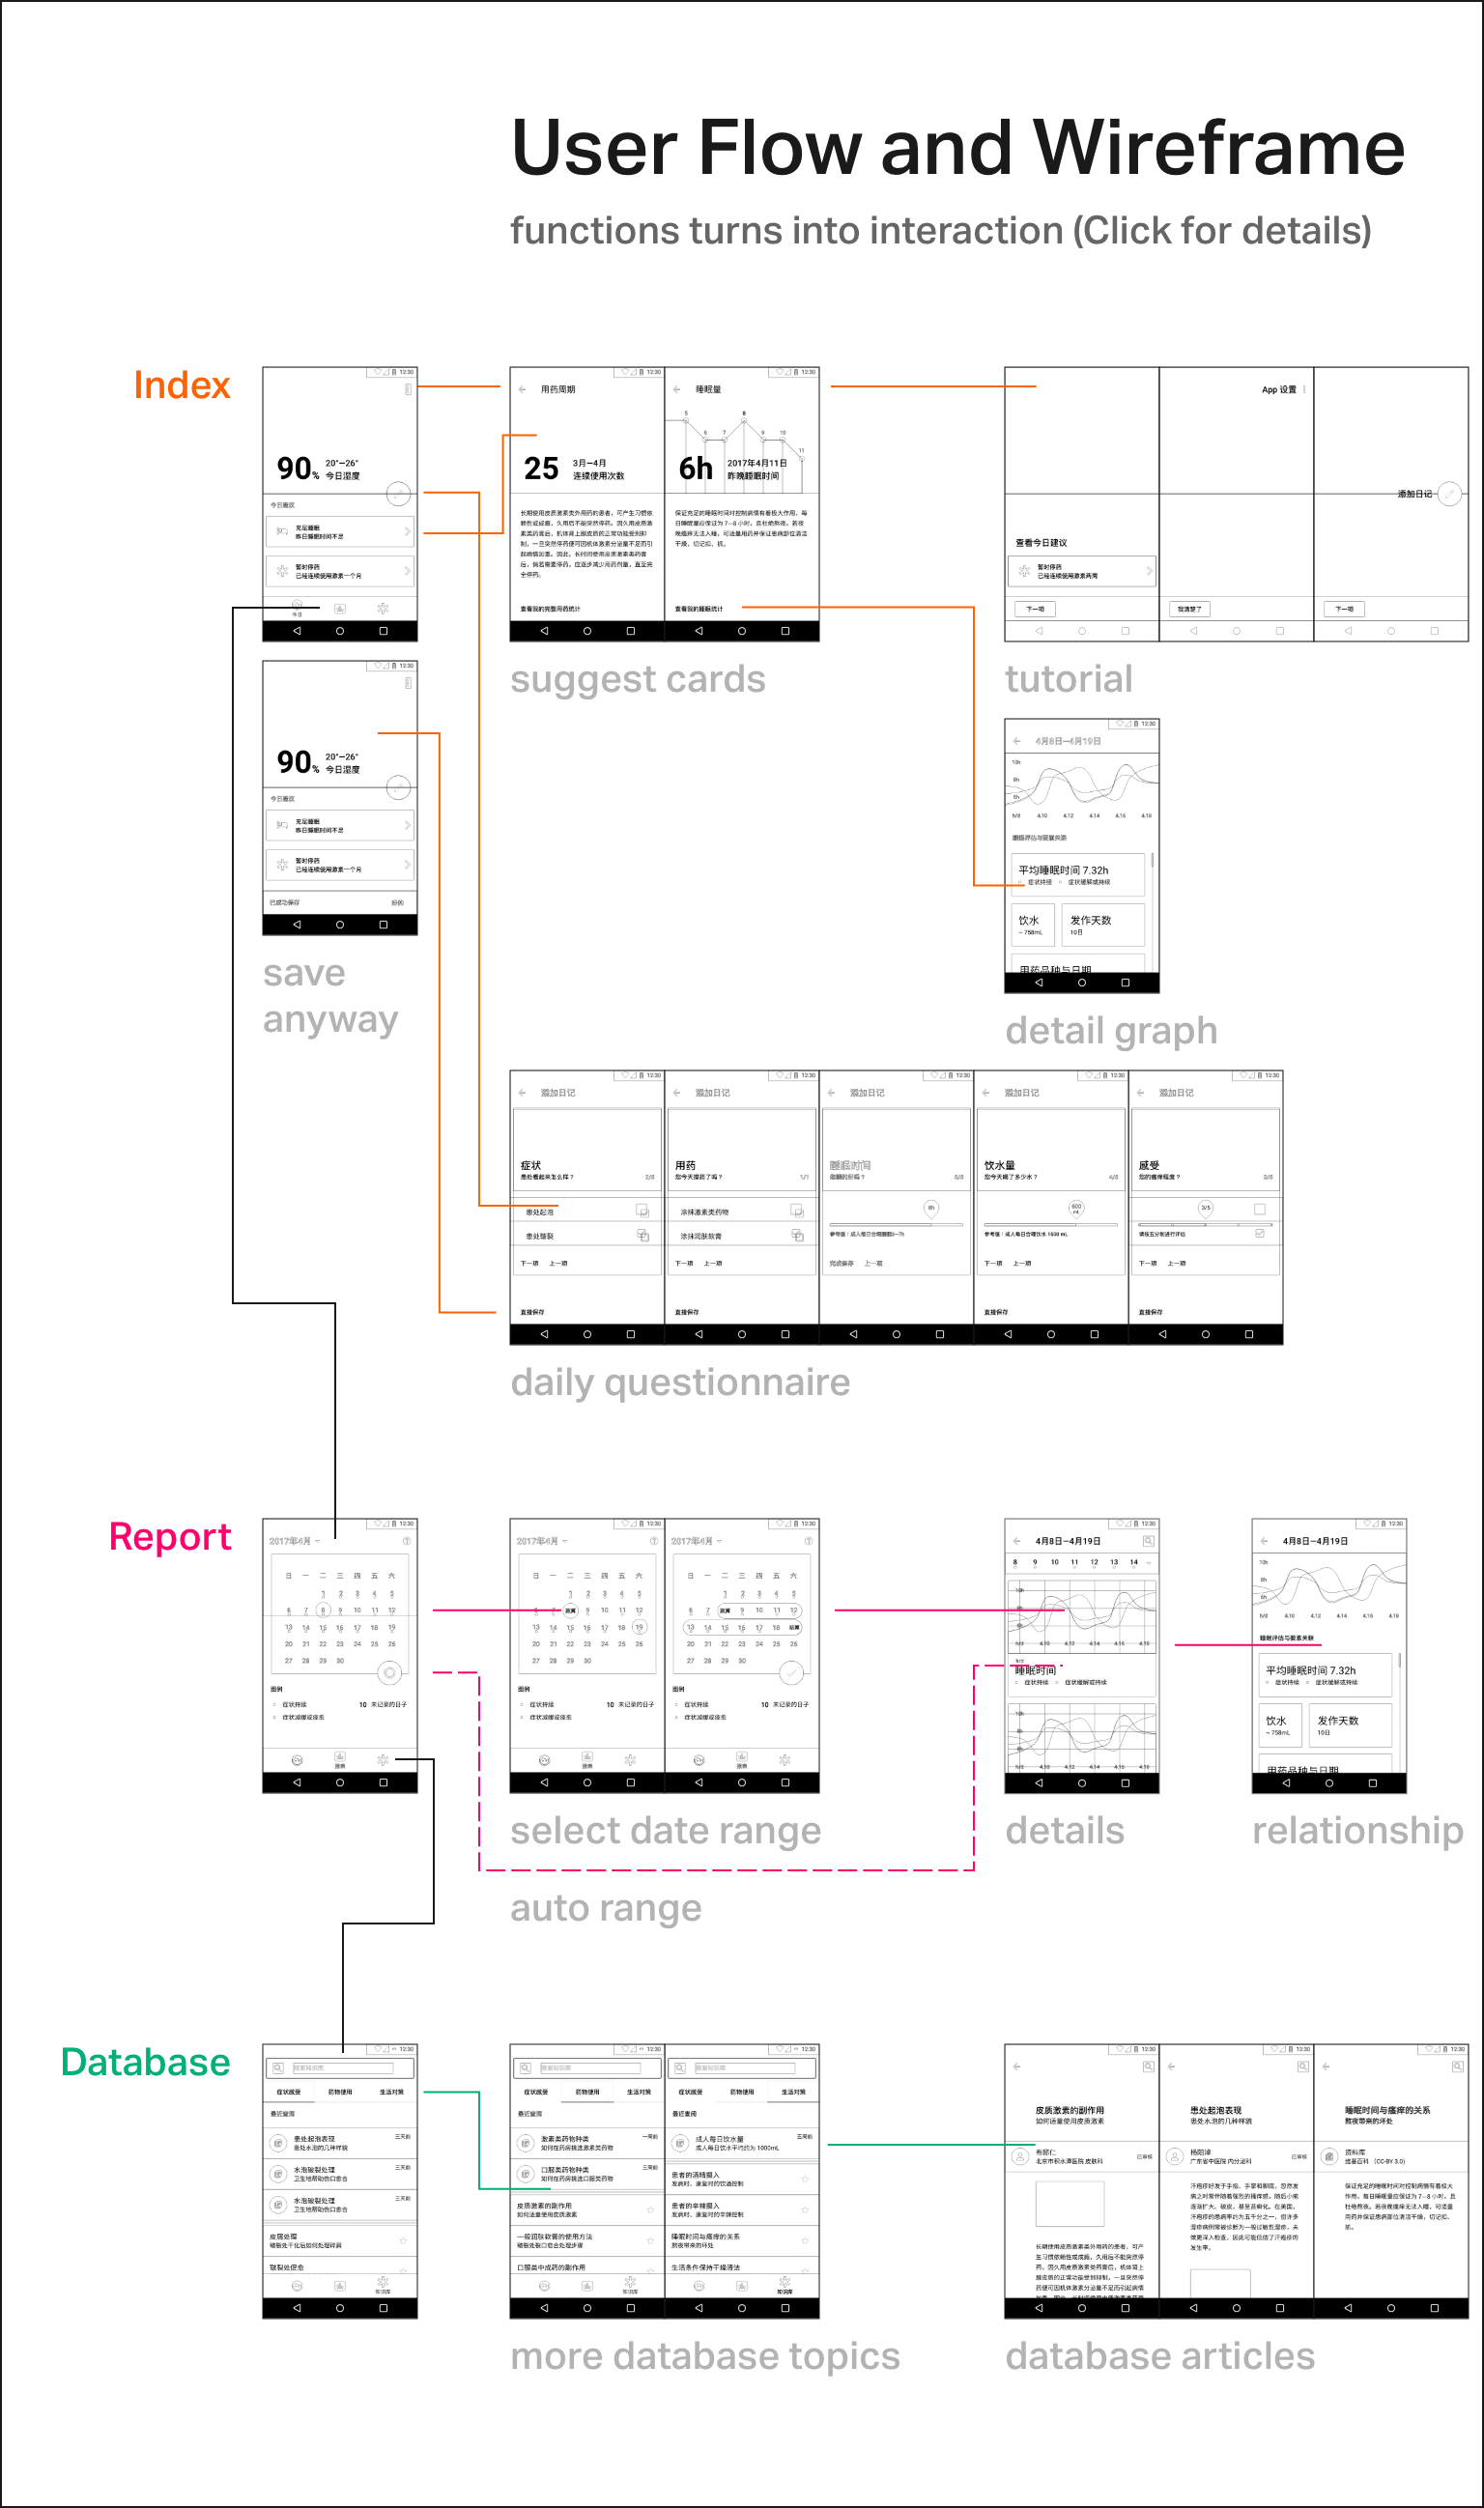 Table of the wireframe